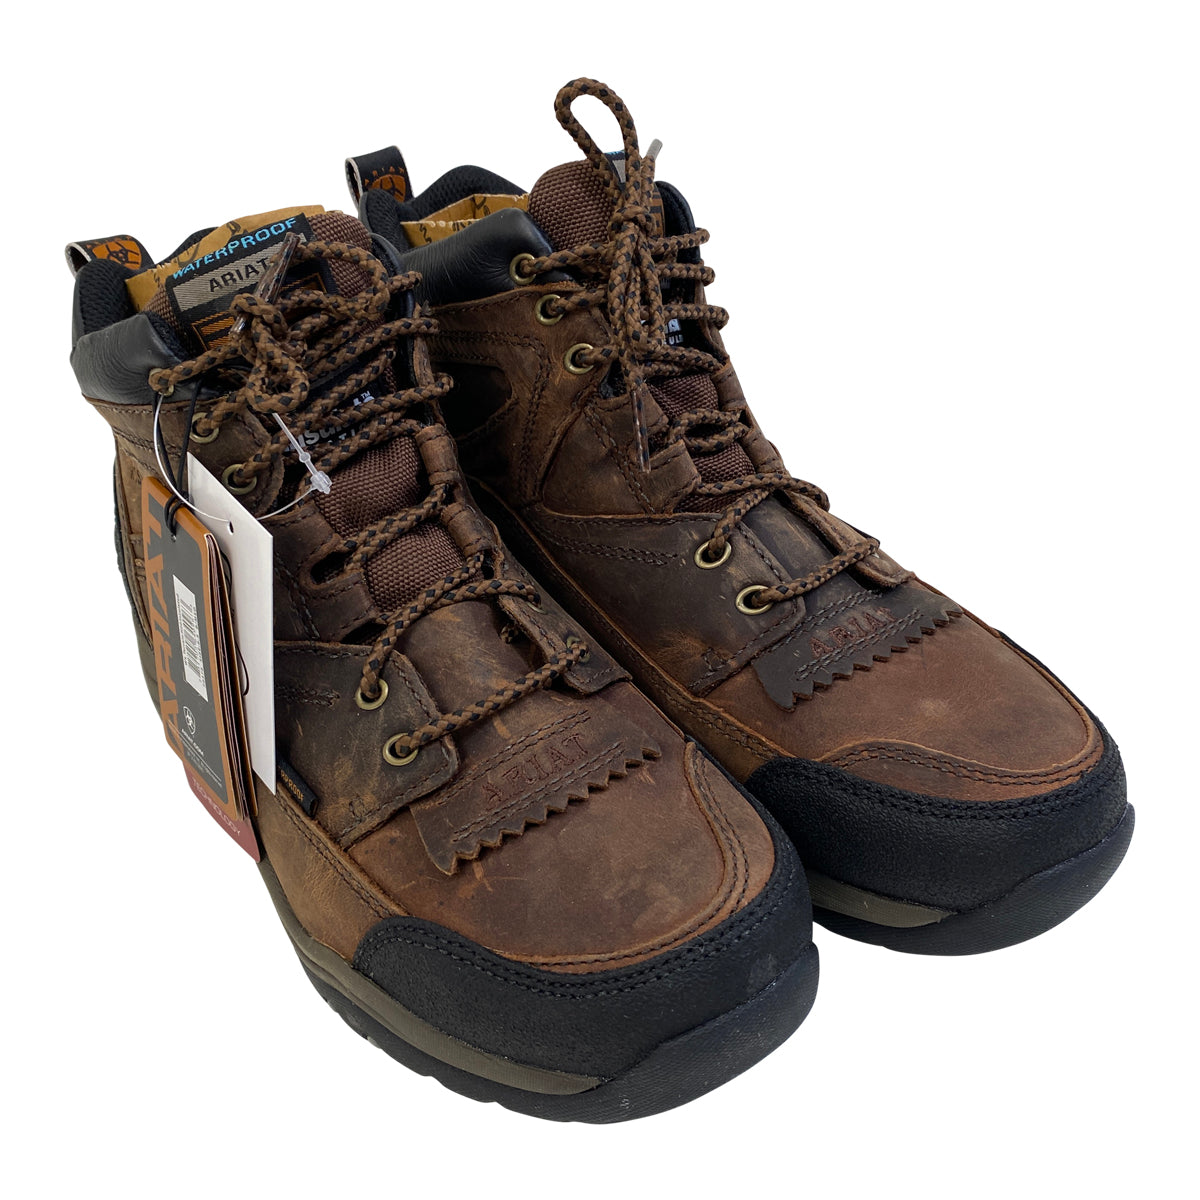 Ariat 'Terrain H20 Insulated' Boots in Coffee